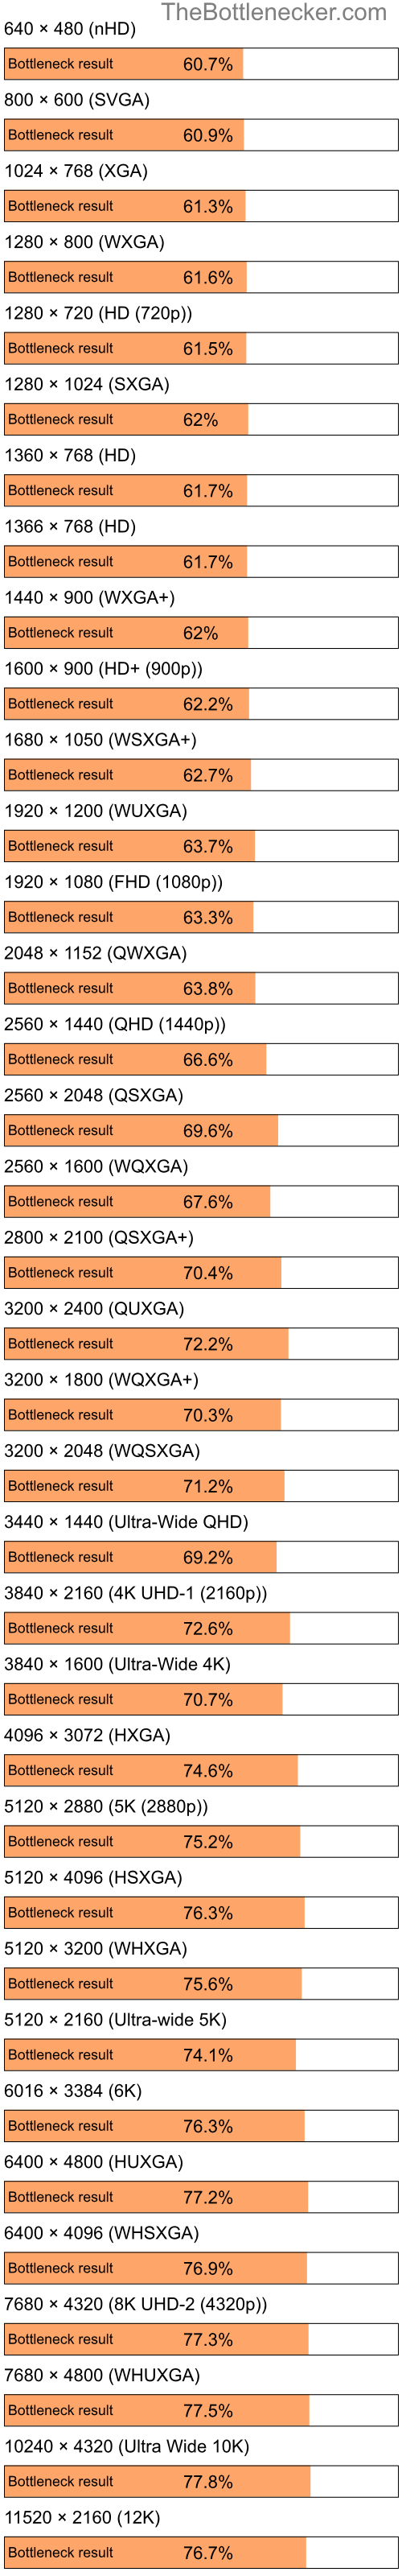 Bottleneck results by resolution for Intel Celeron M 420 and NVIDIA Quadro FX 3000 in Processor Intense Tasks